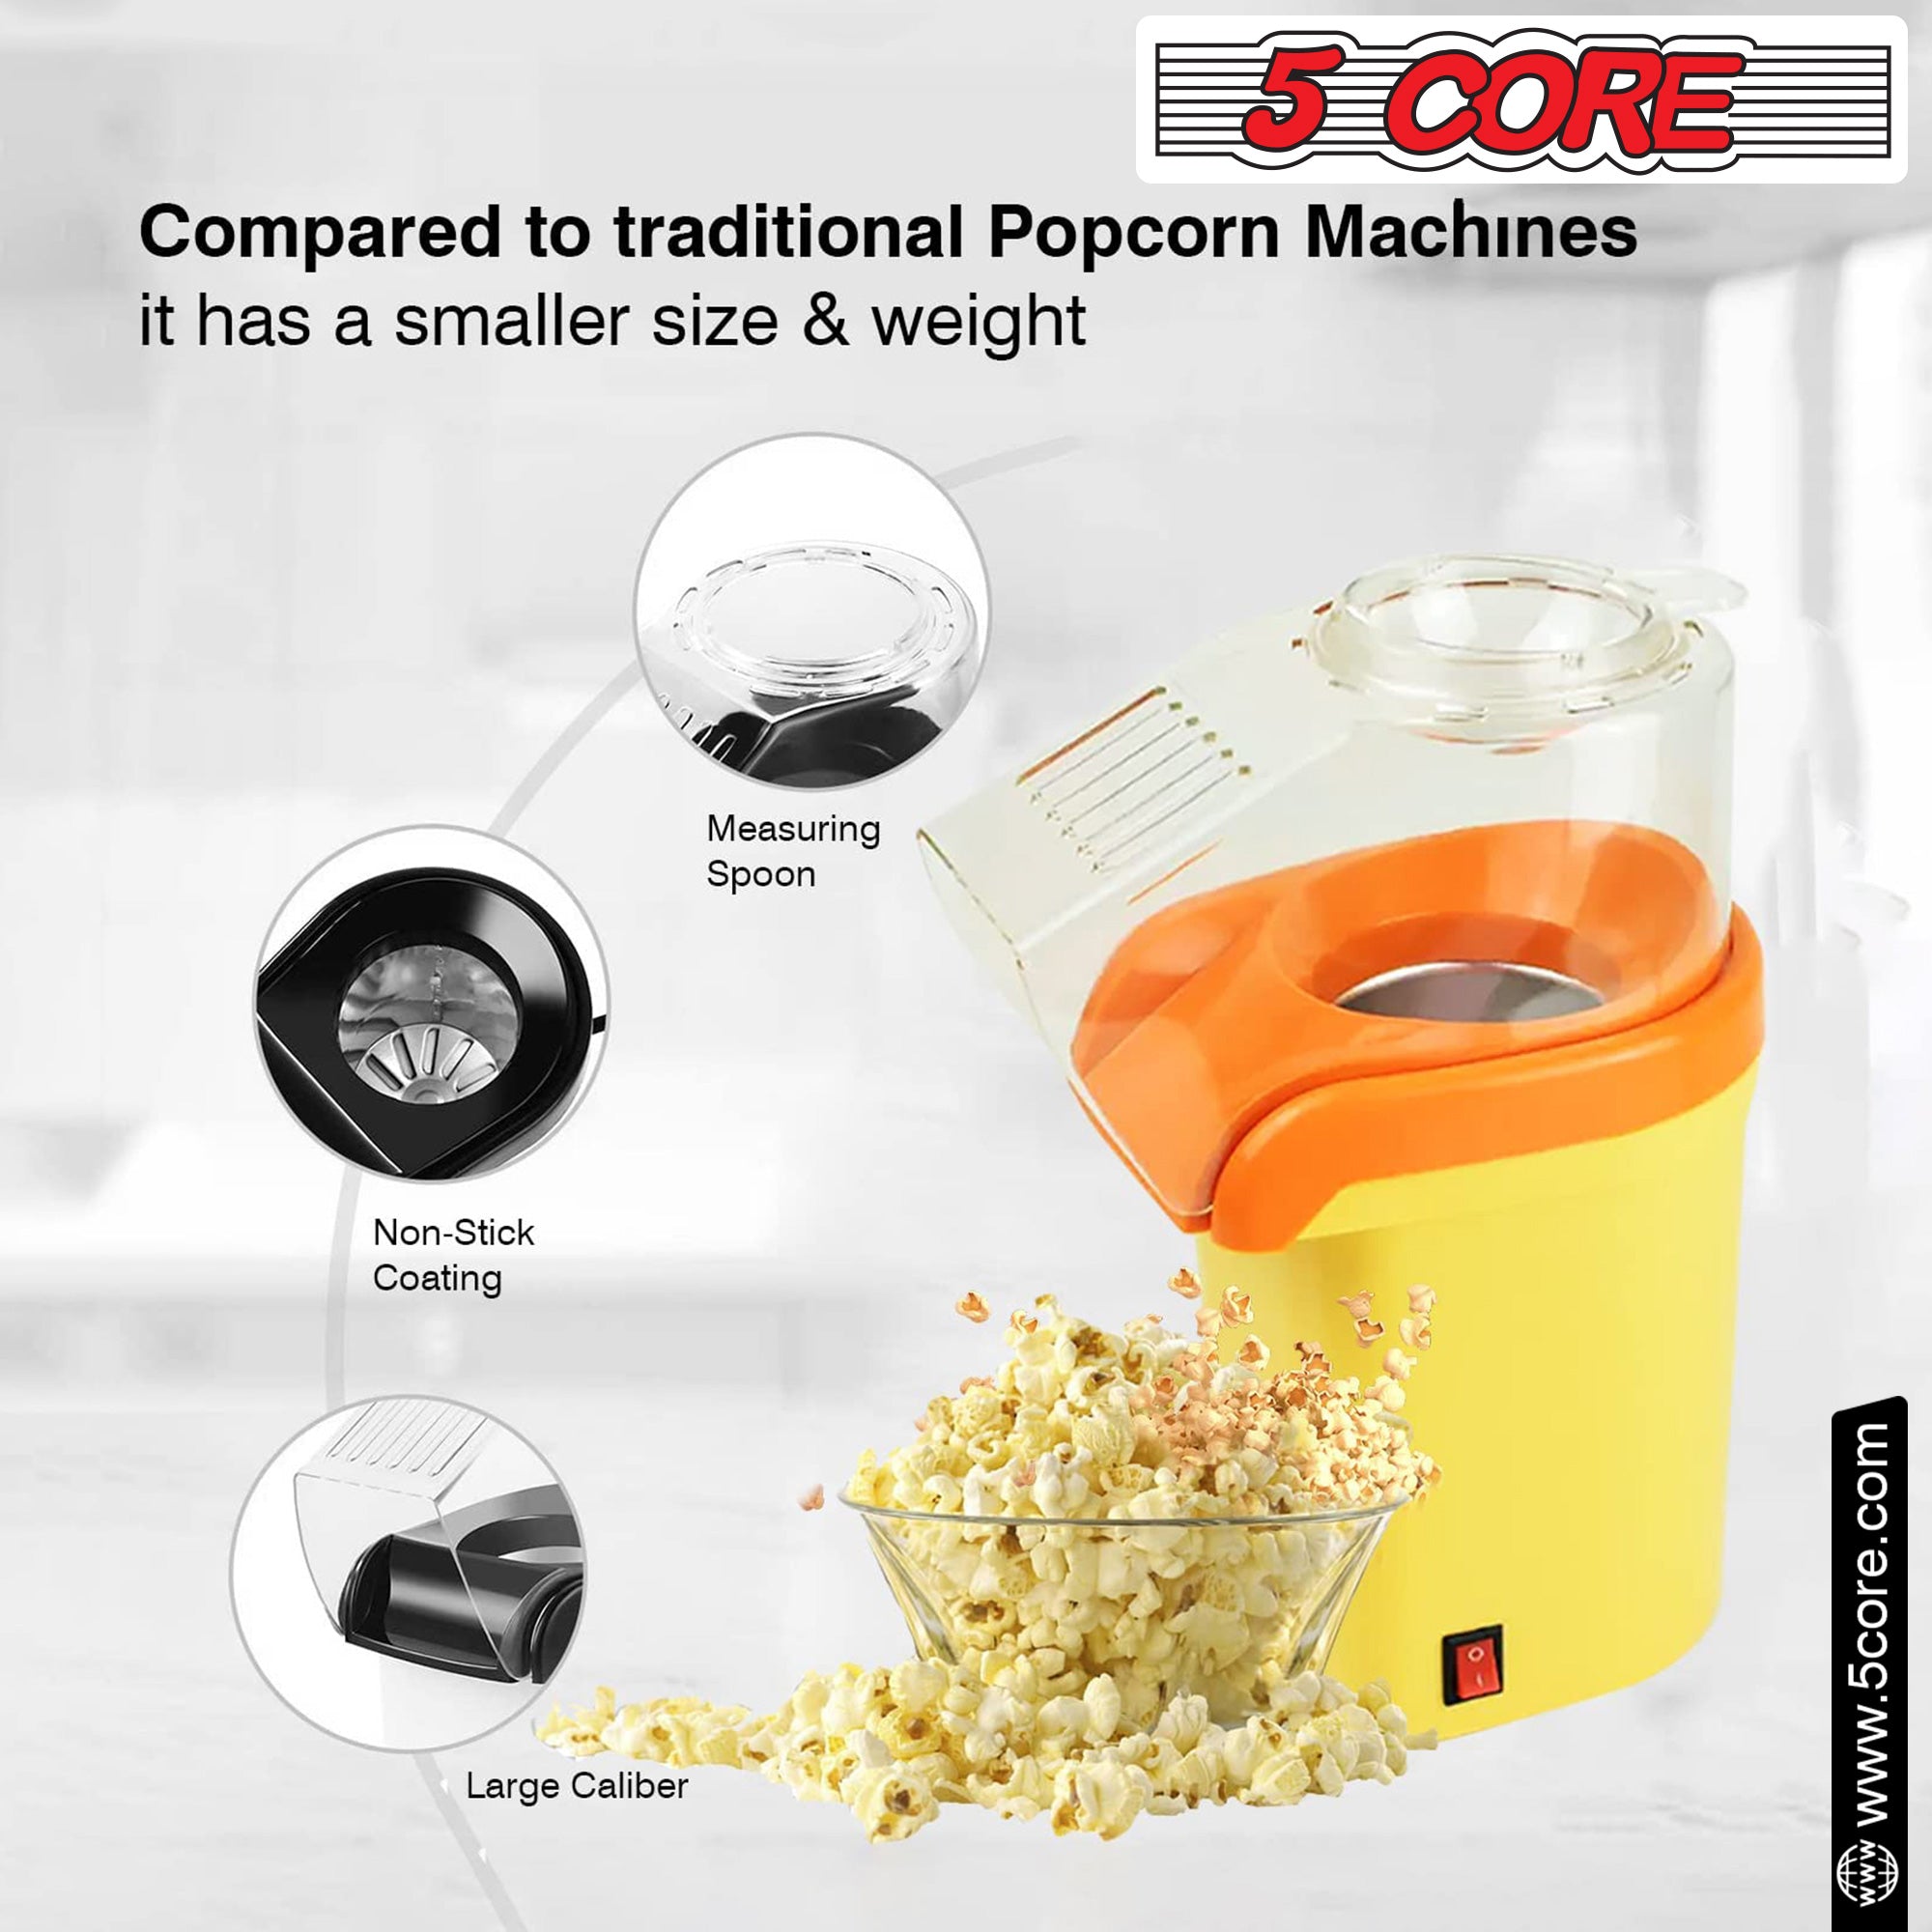 Popcorn machine compared to traditional popcorn machines it has a smaller size & weight.